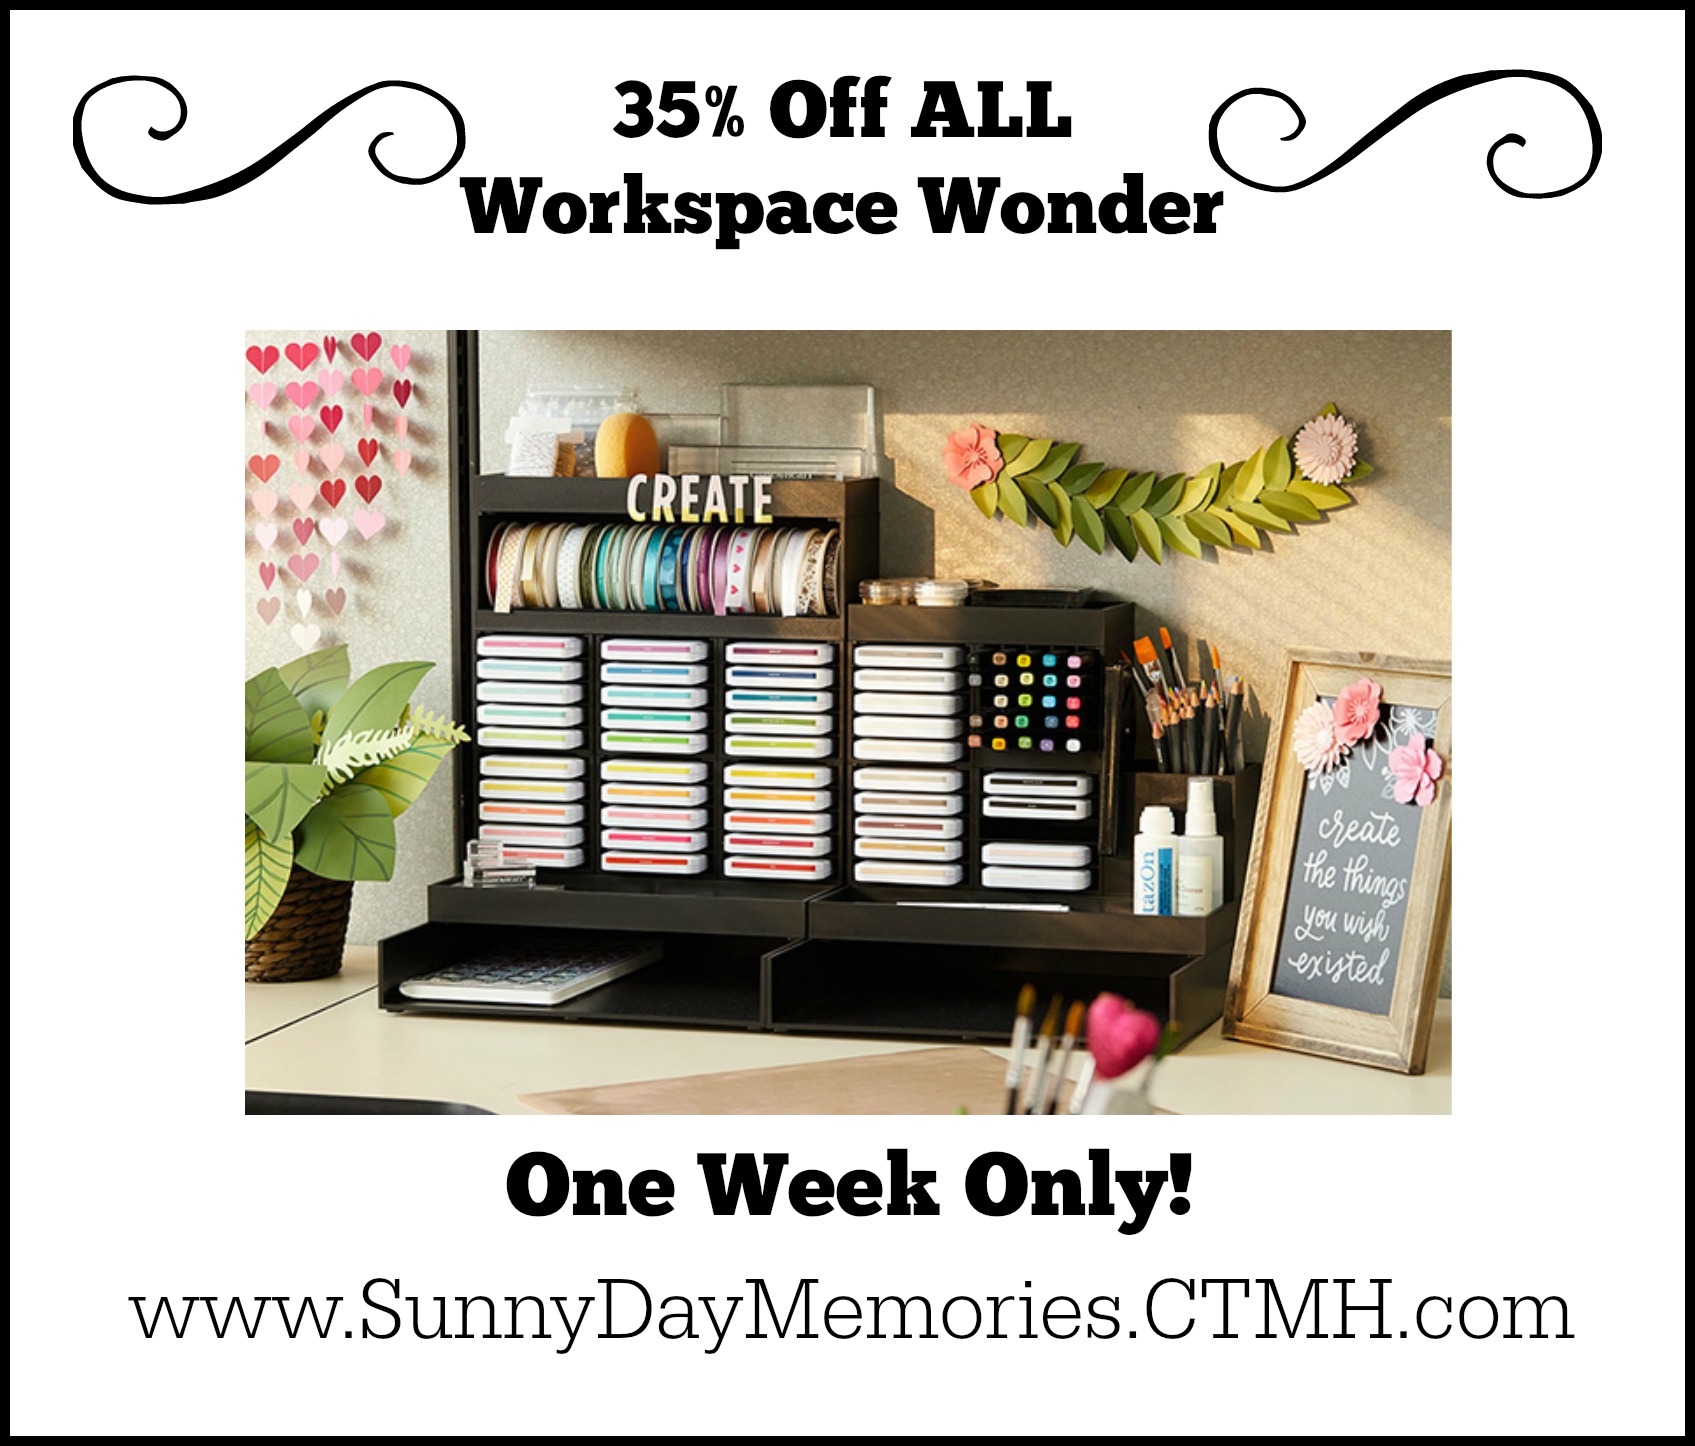 35th Anniversary Special for Workspace Wonder